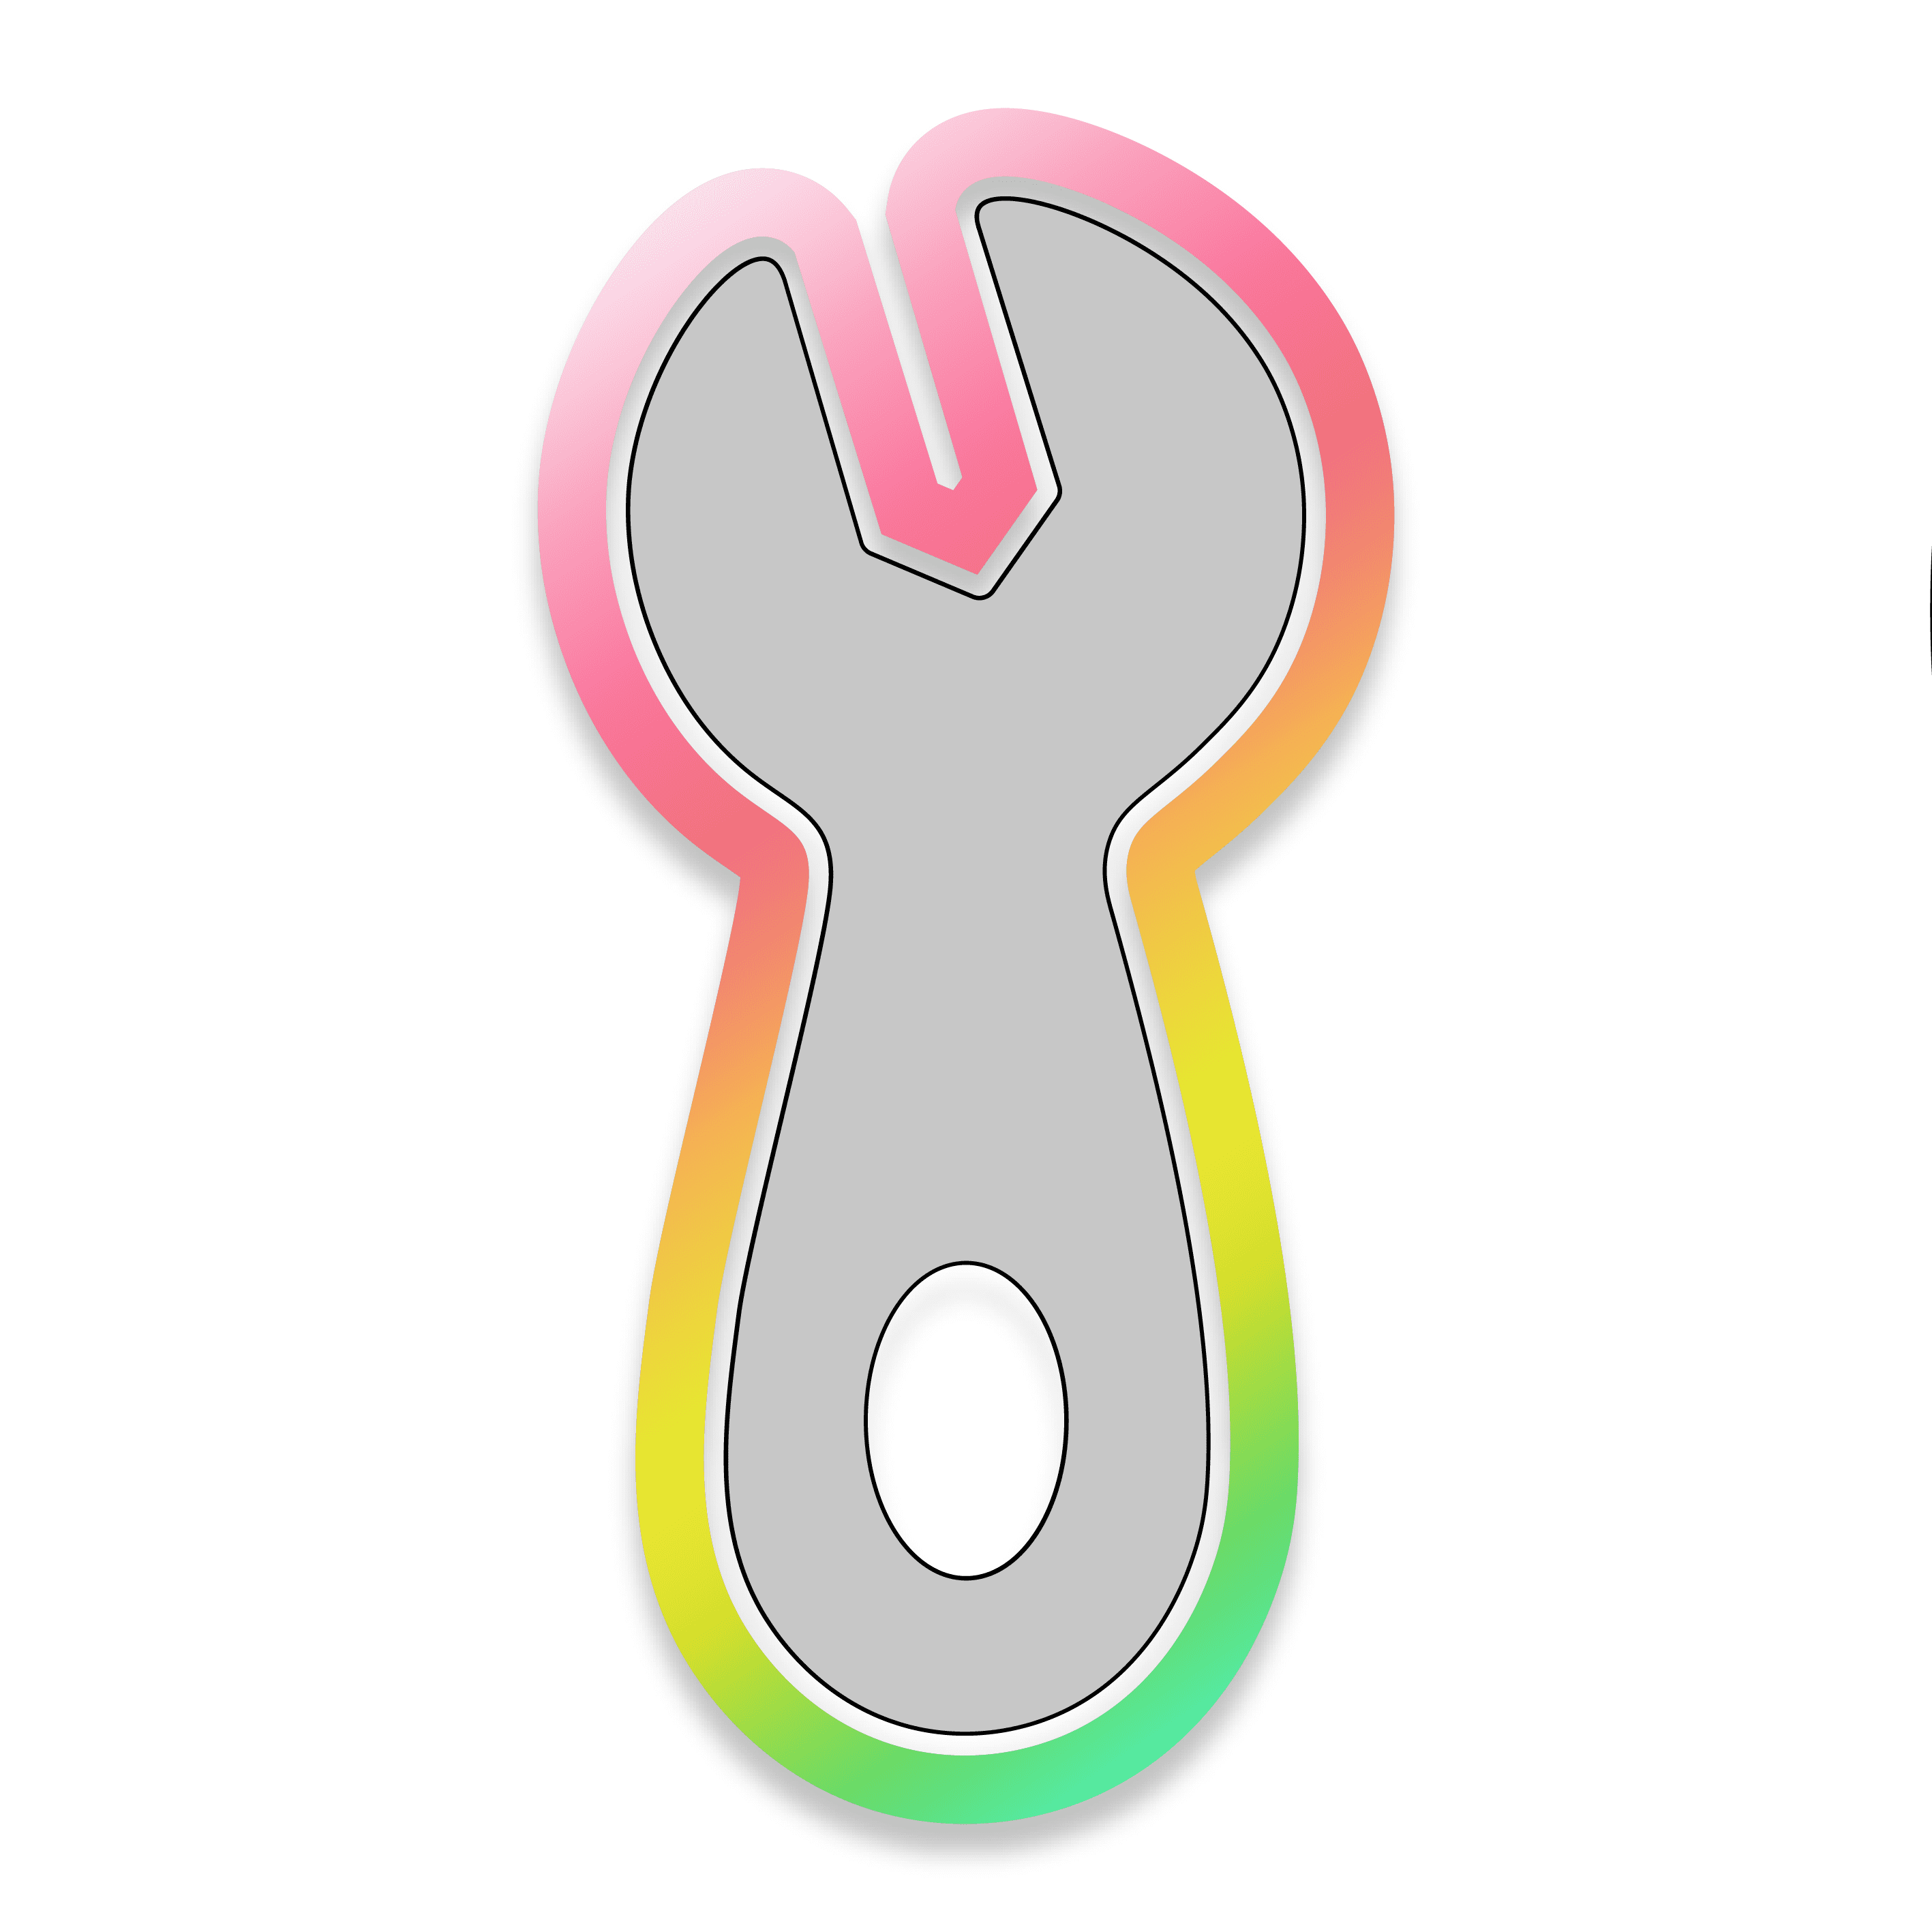 Digital Drawing of a Gray Wrench Cookie Cutter